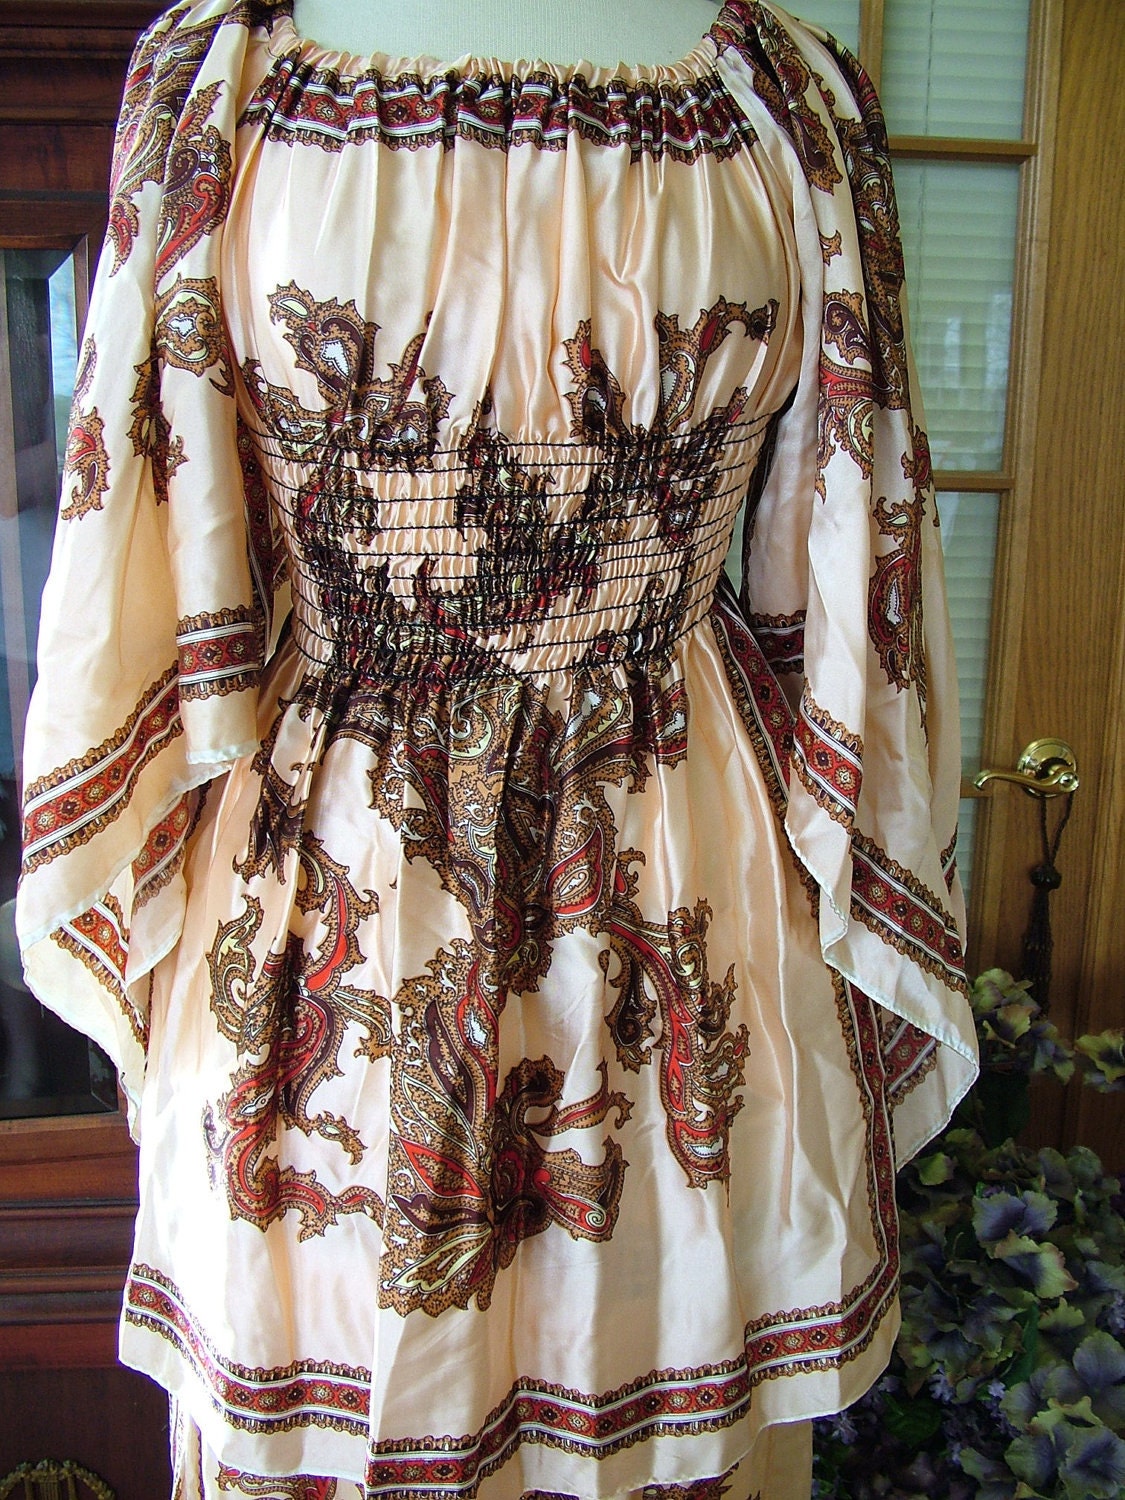 1970s Hippie boho chic scarf blouse and skirt with dragon design shirt